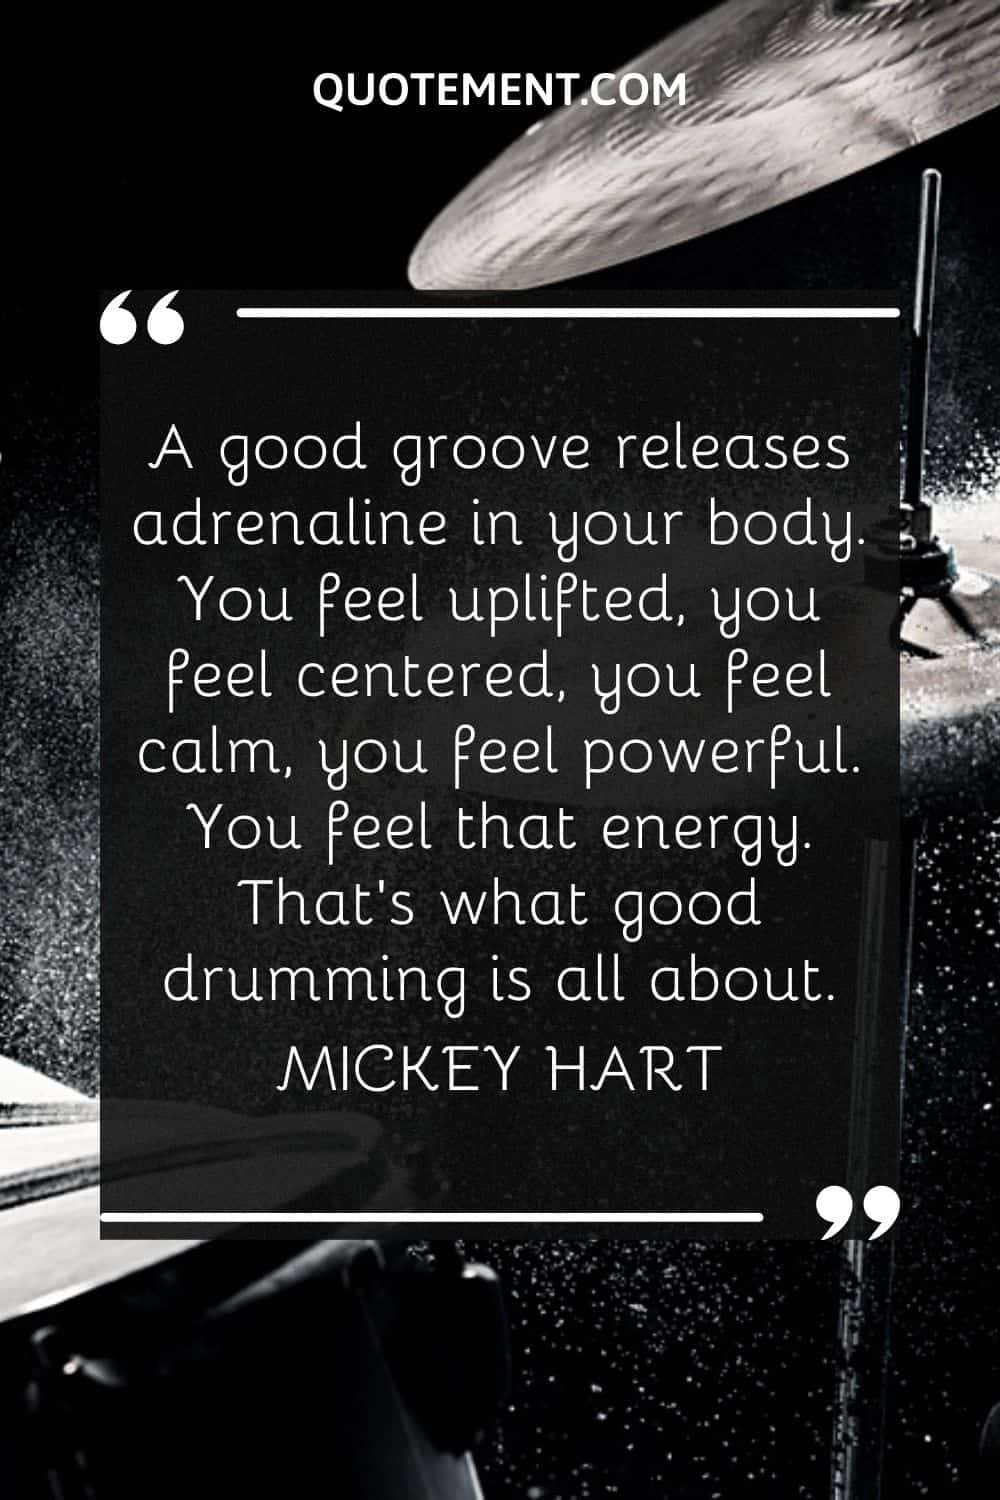 A good groove releases adrenaline in your body